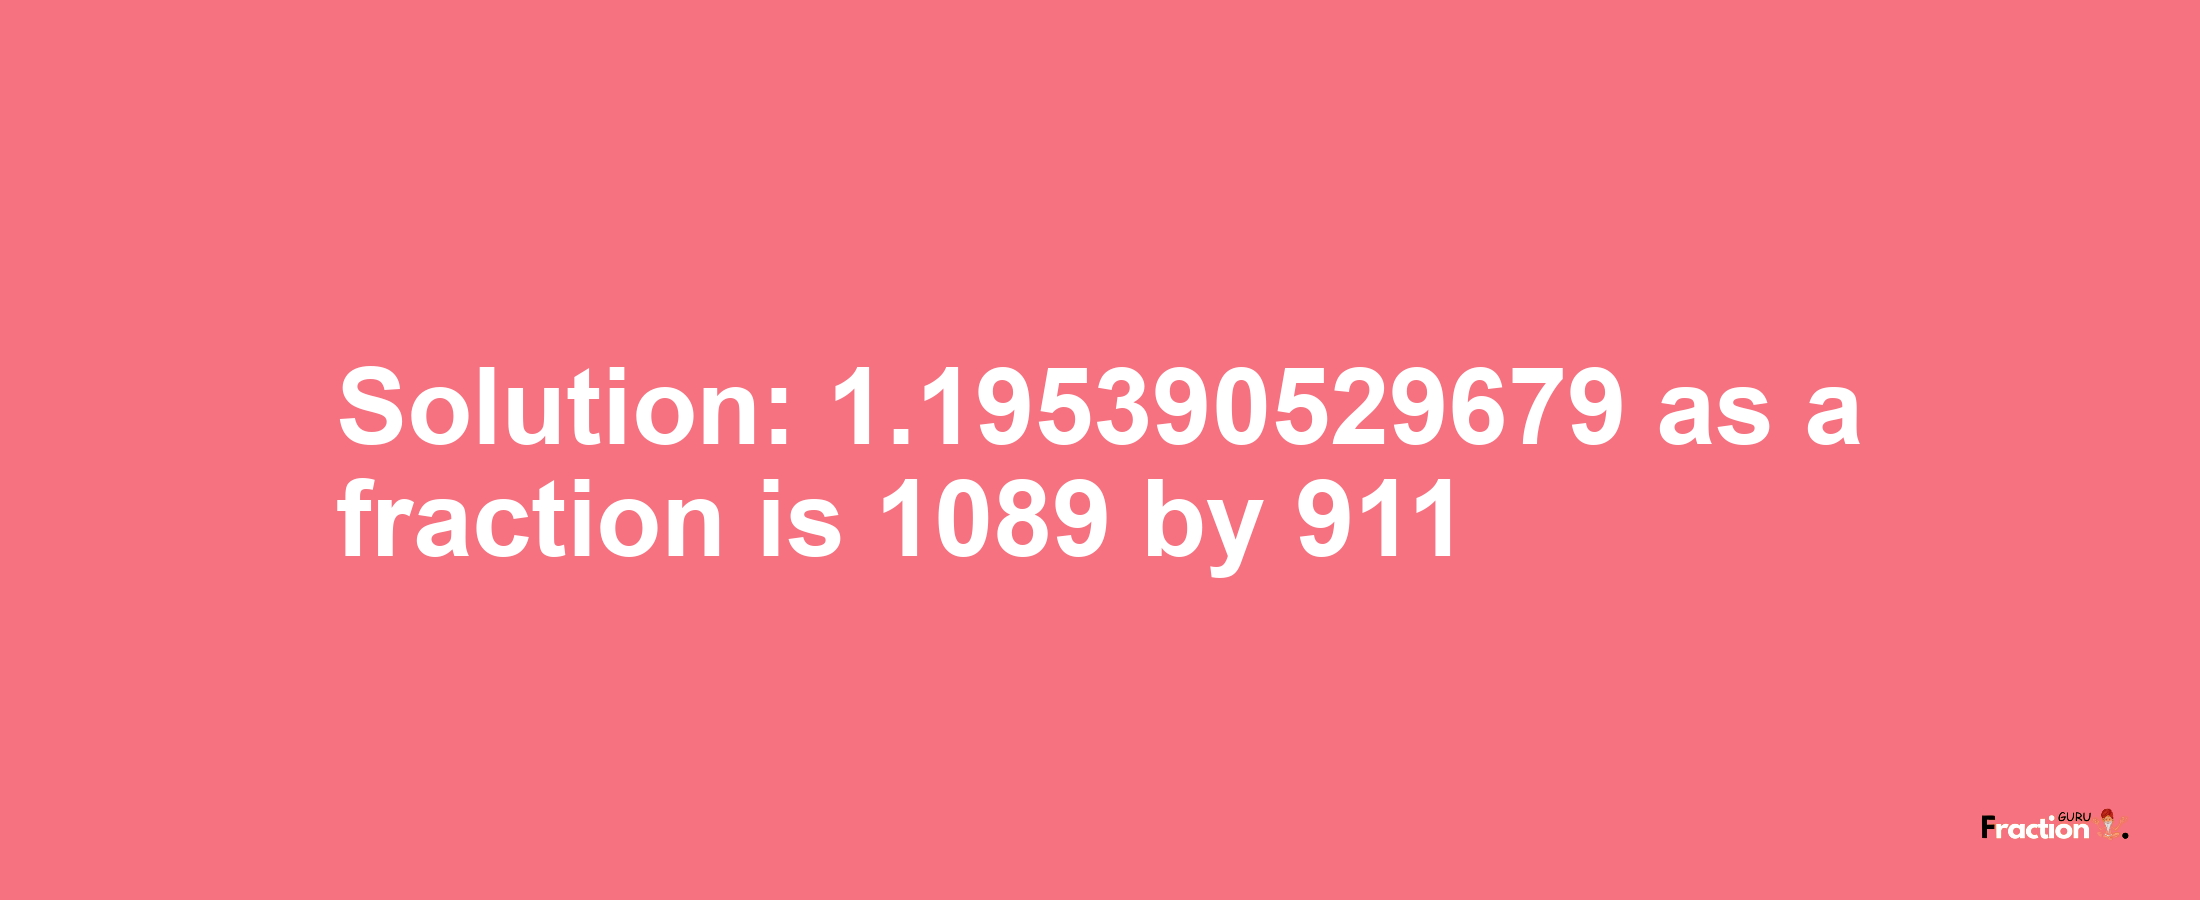 Solution:1.195390529679 as a fraction is 1089/911